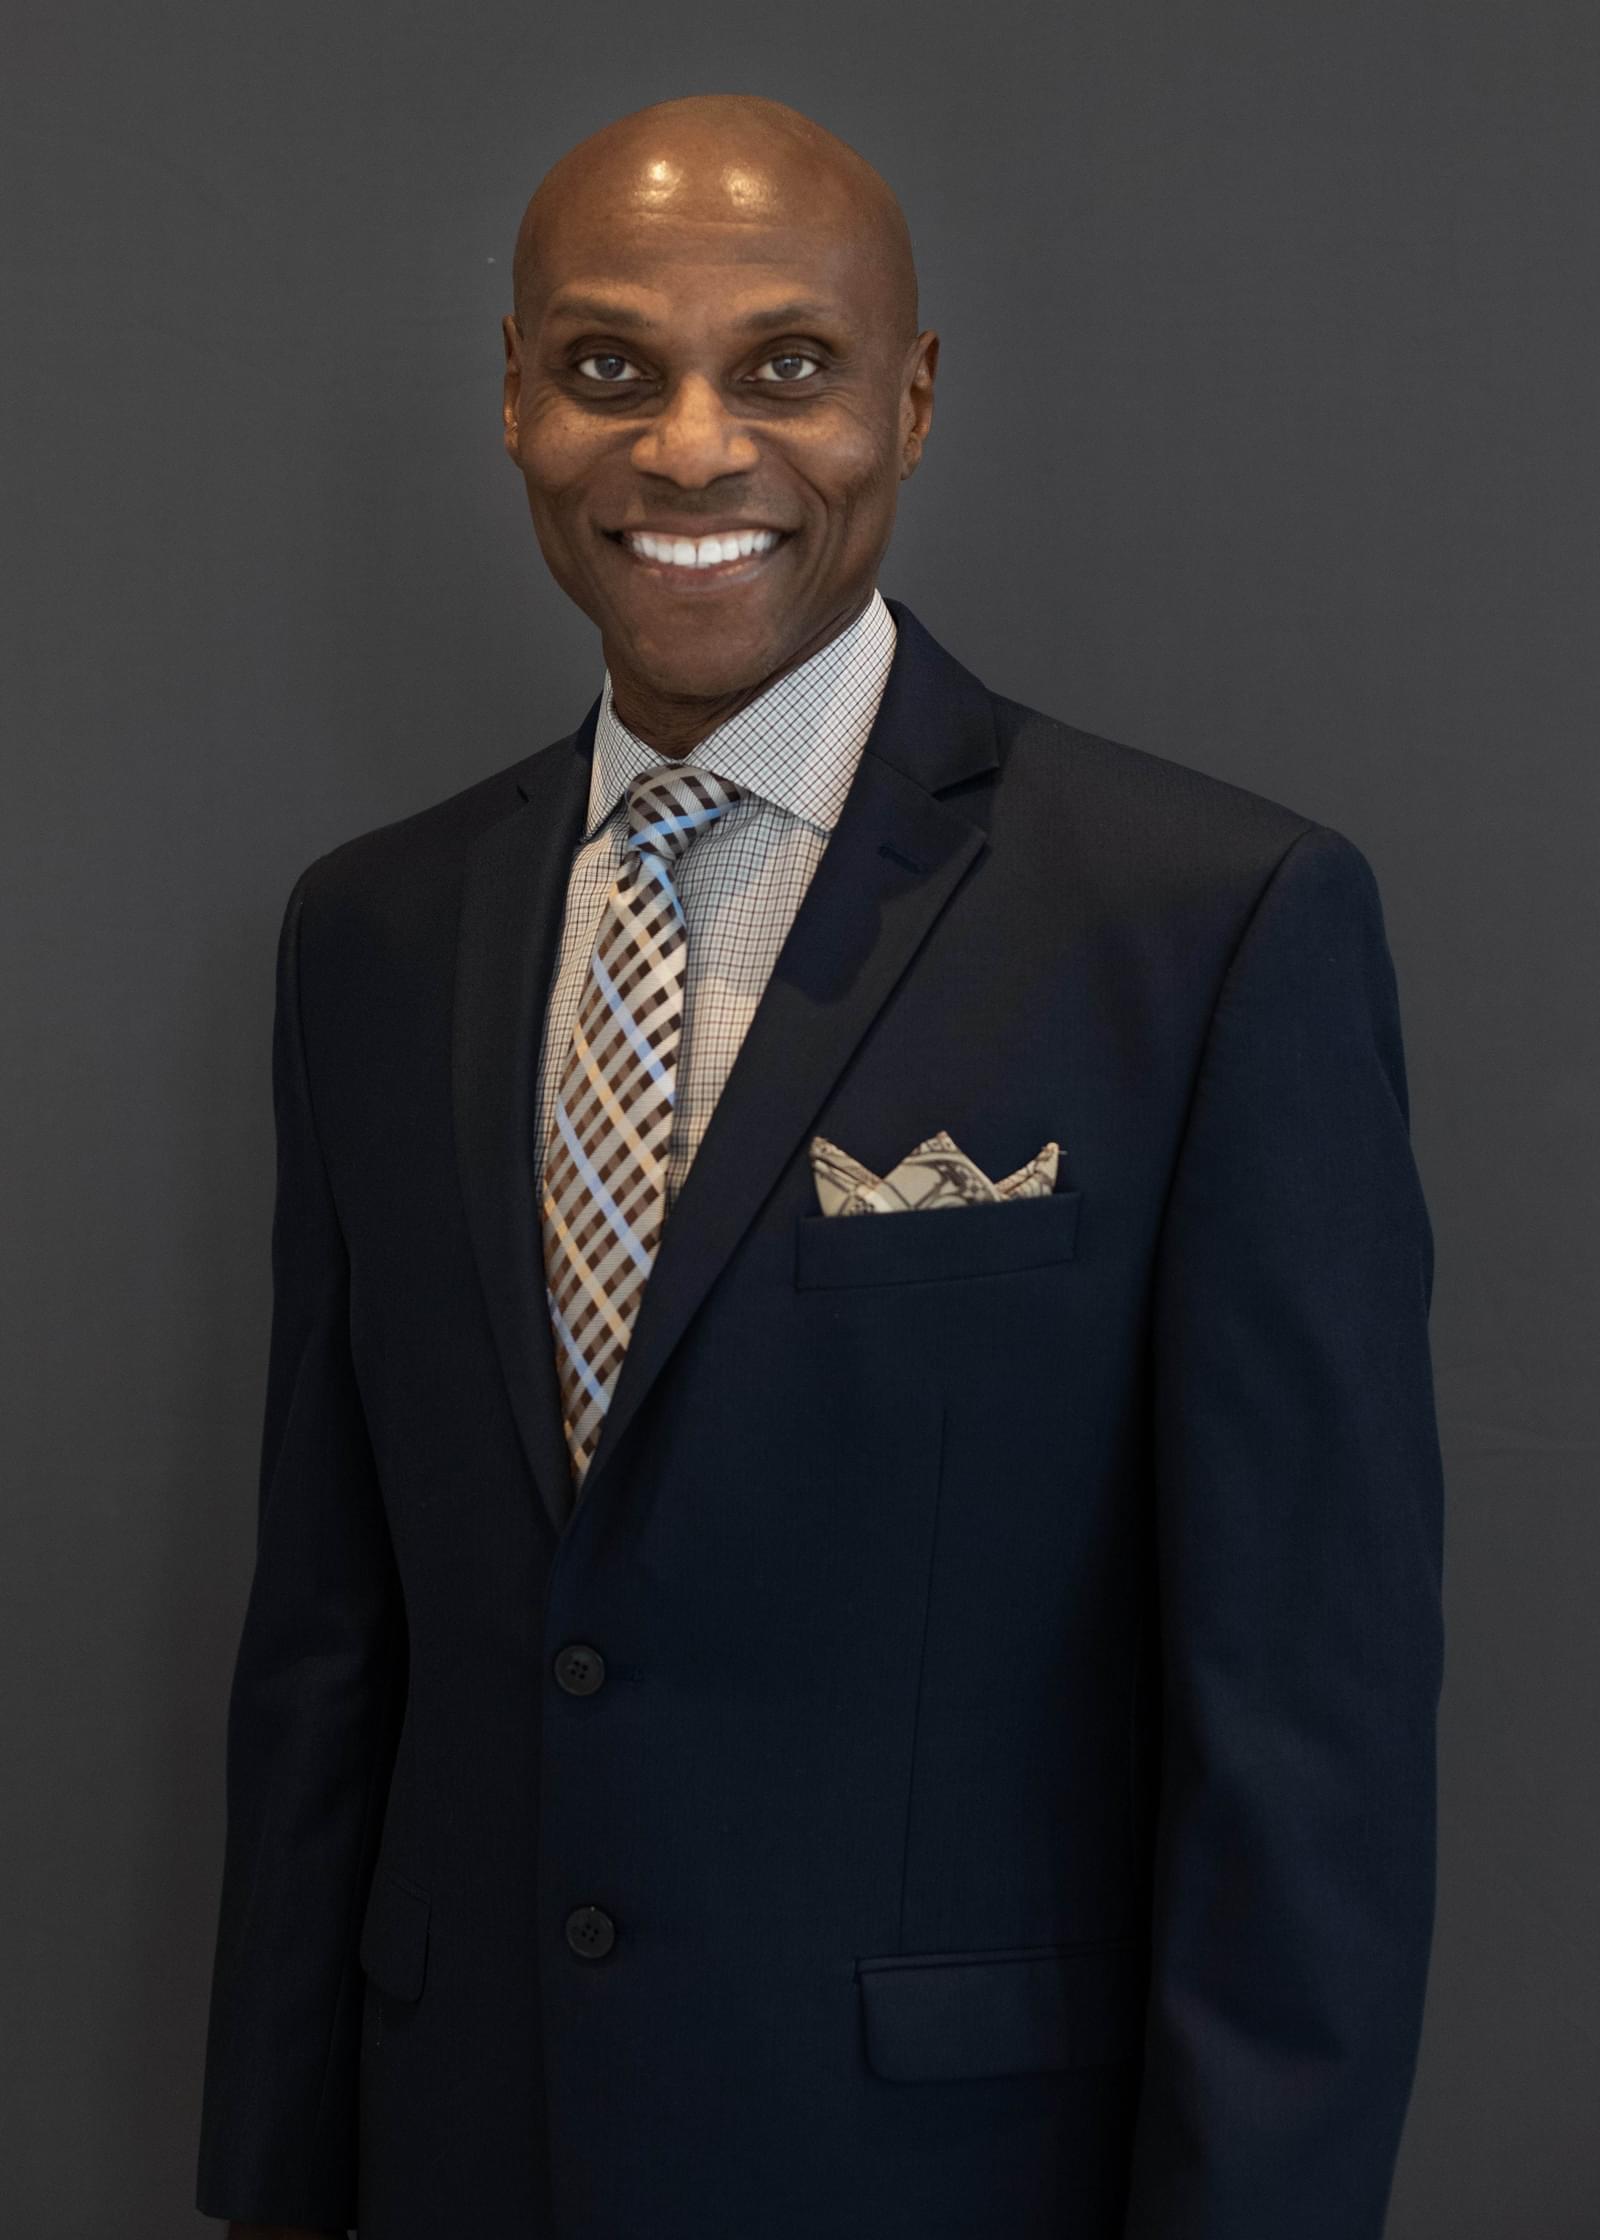 A smiling headshot photo of Cedric Layton in a suit and tie